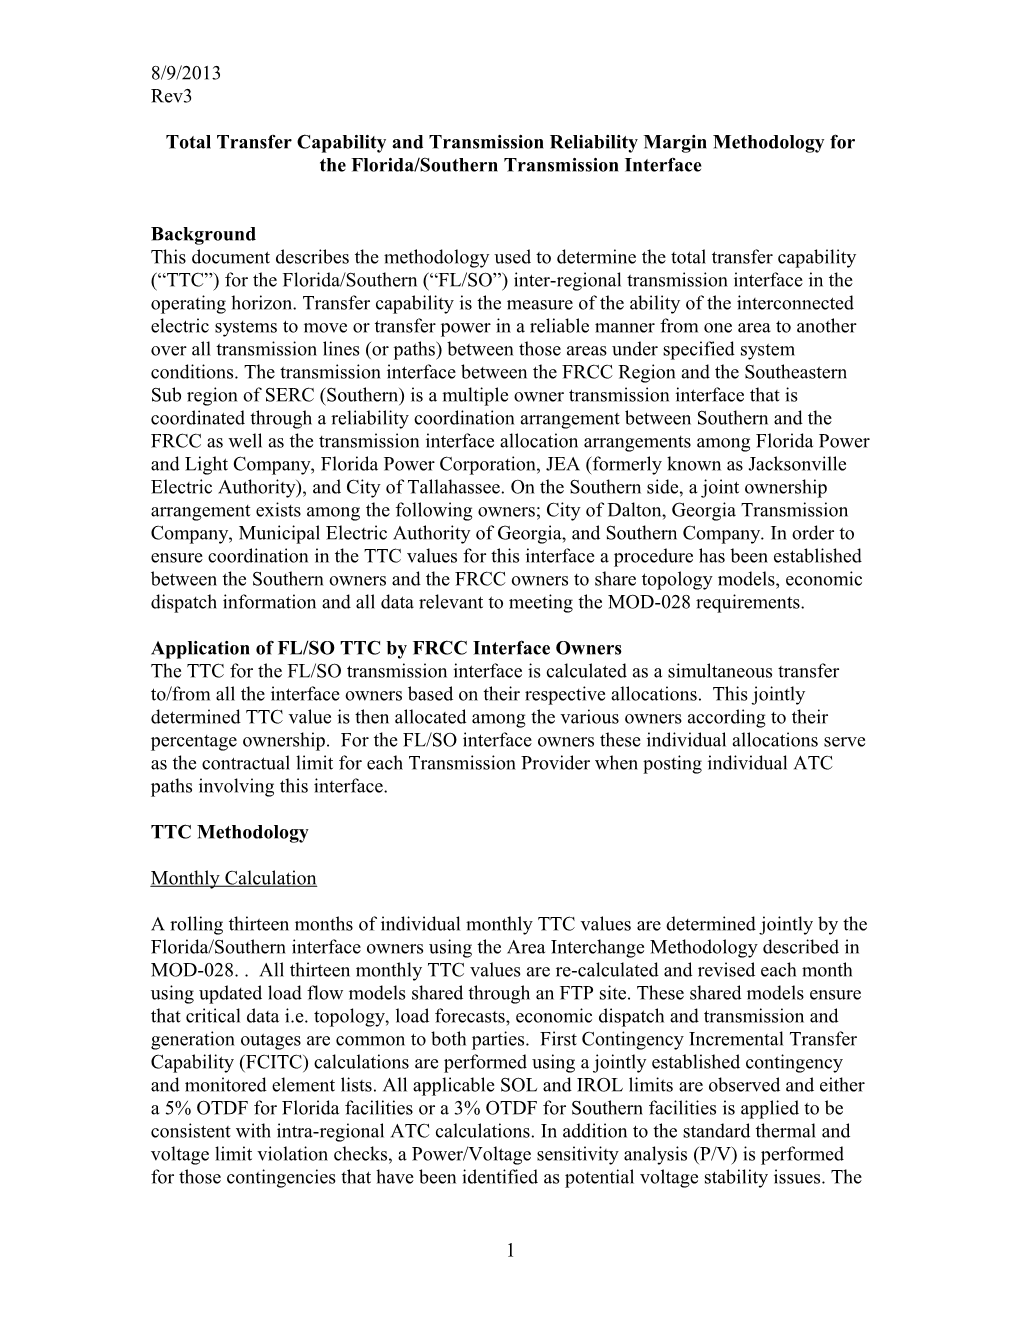 Total Transfer Capability Methodology for the Southern/Florida Transmission Interface In